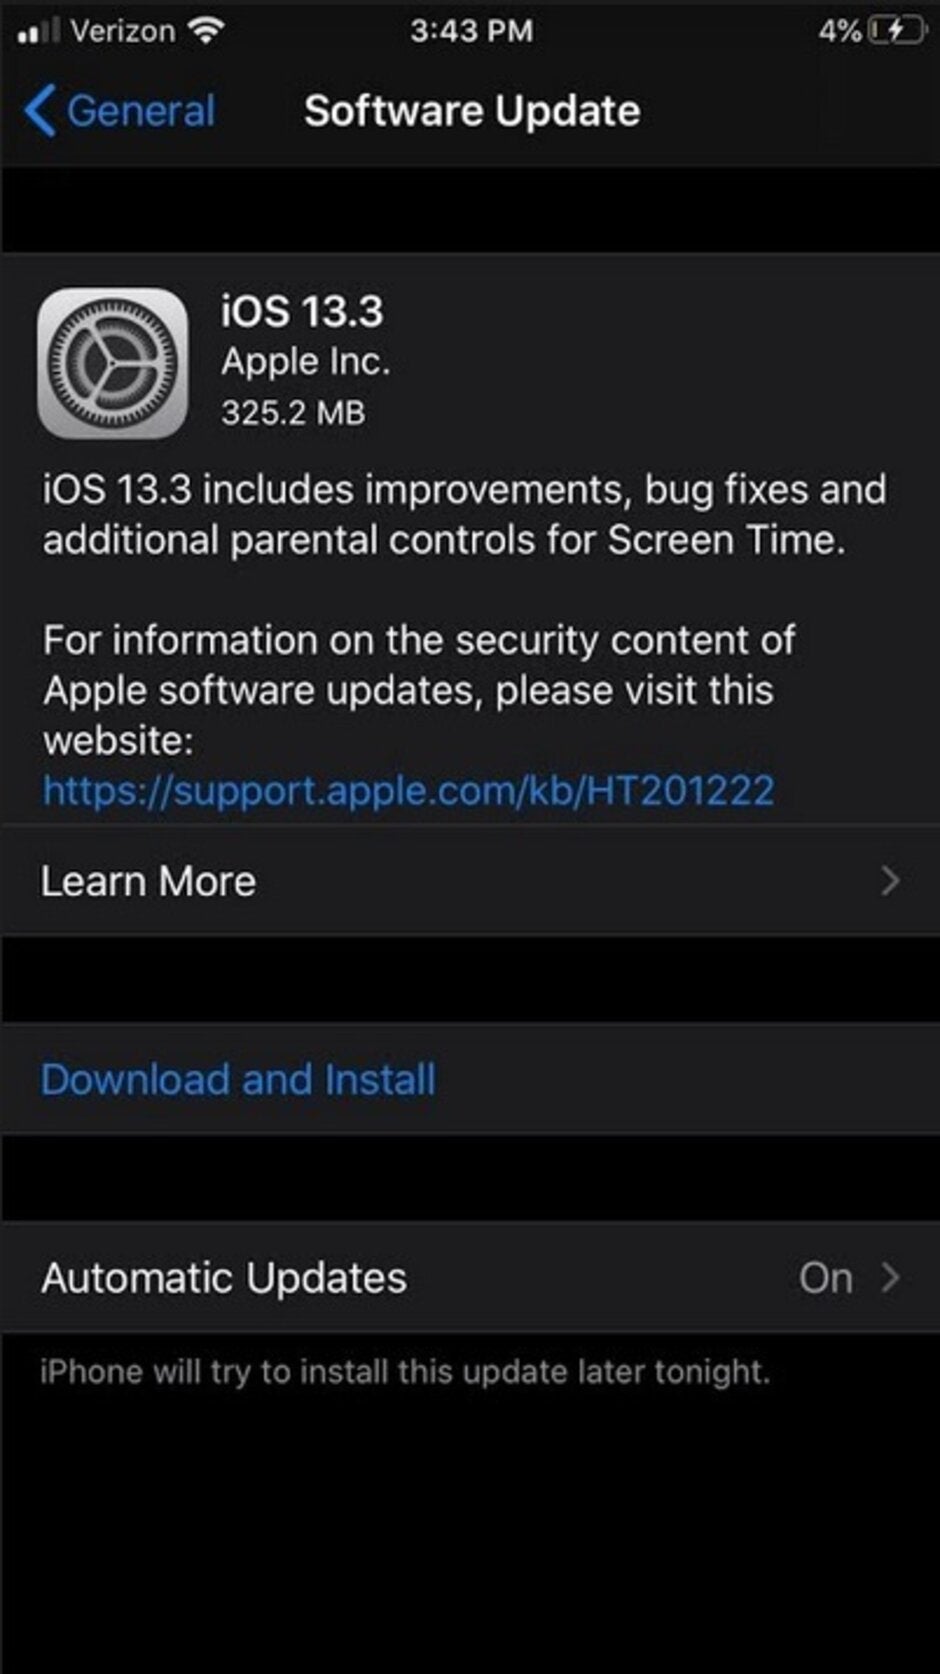 Apple pushes out a number of updates including iOS and iPadOS 13.3 - Apple drops iOS 13.3, iPadOS 13.3, tvOS 13.3 and more